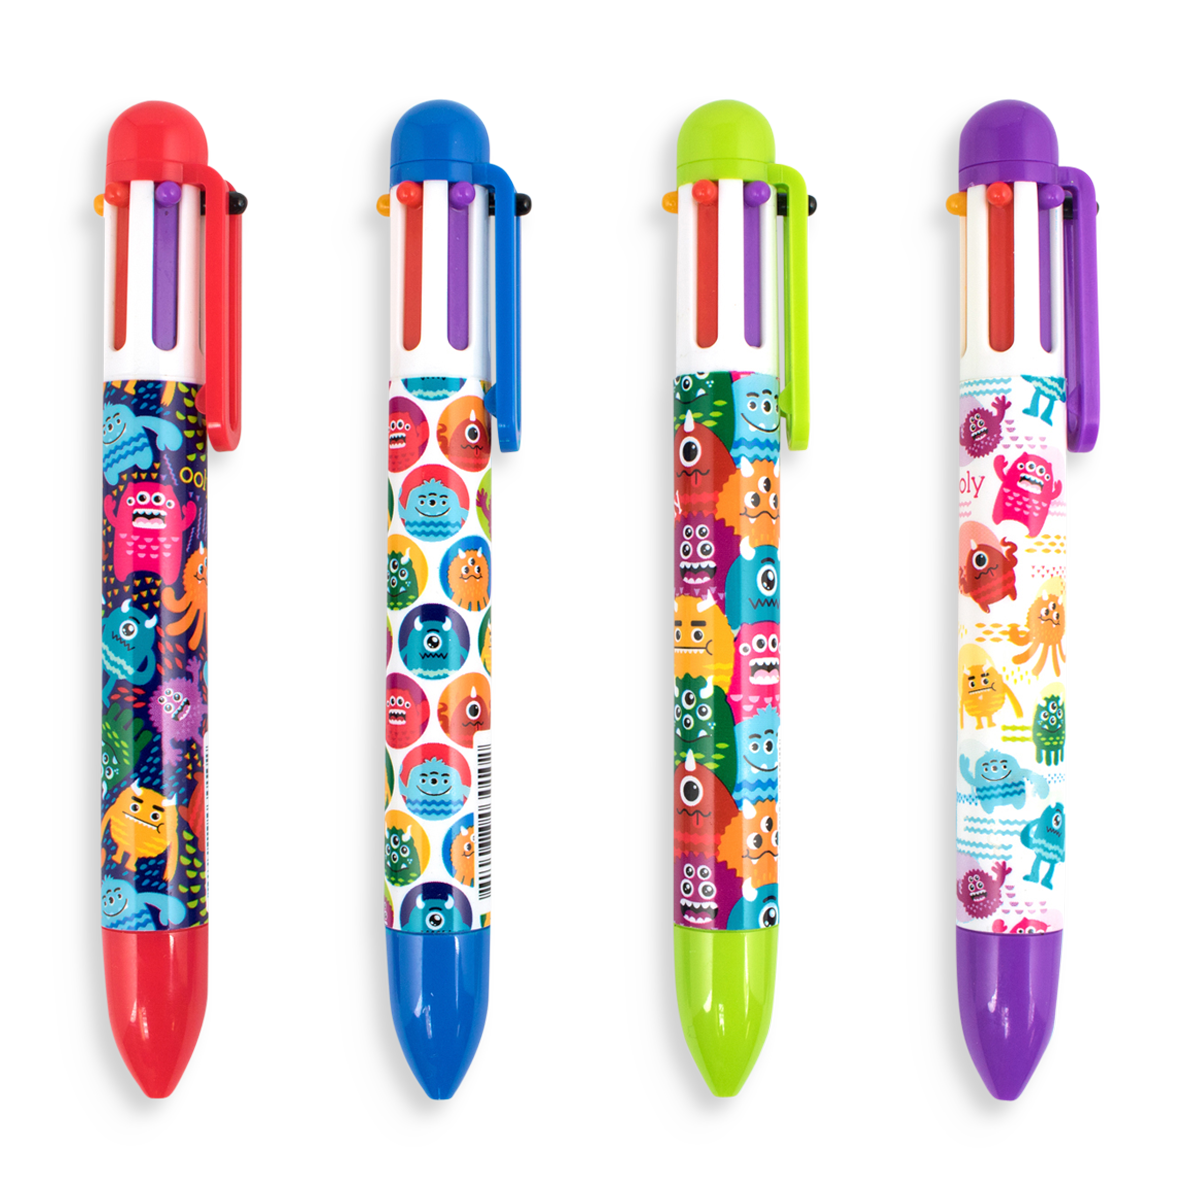 All 4 styles of the Monster 6 Click multi color pens